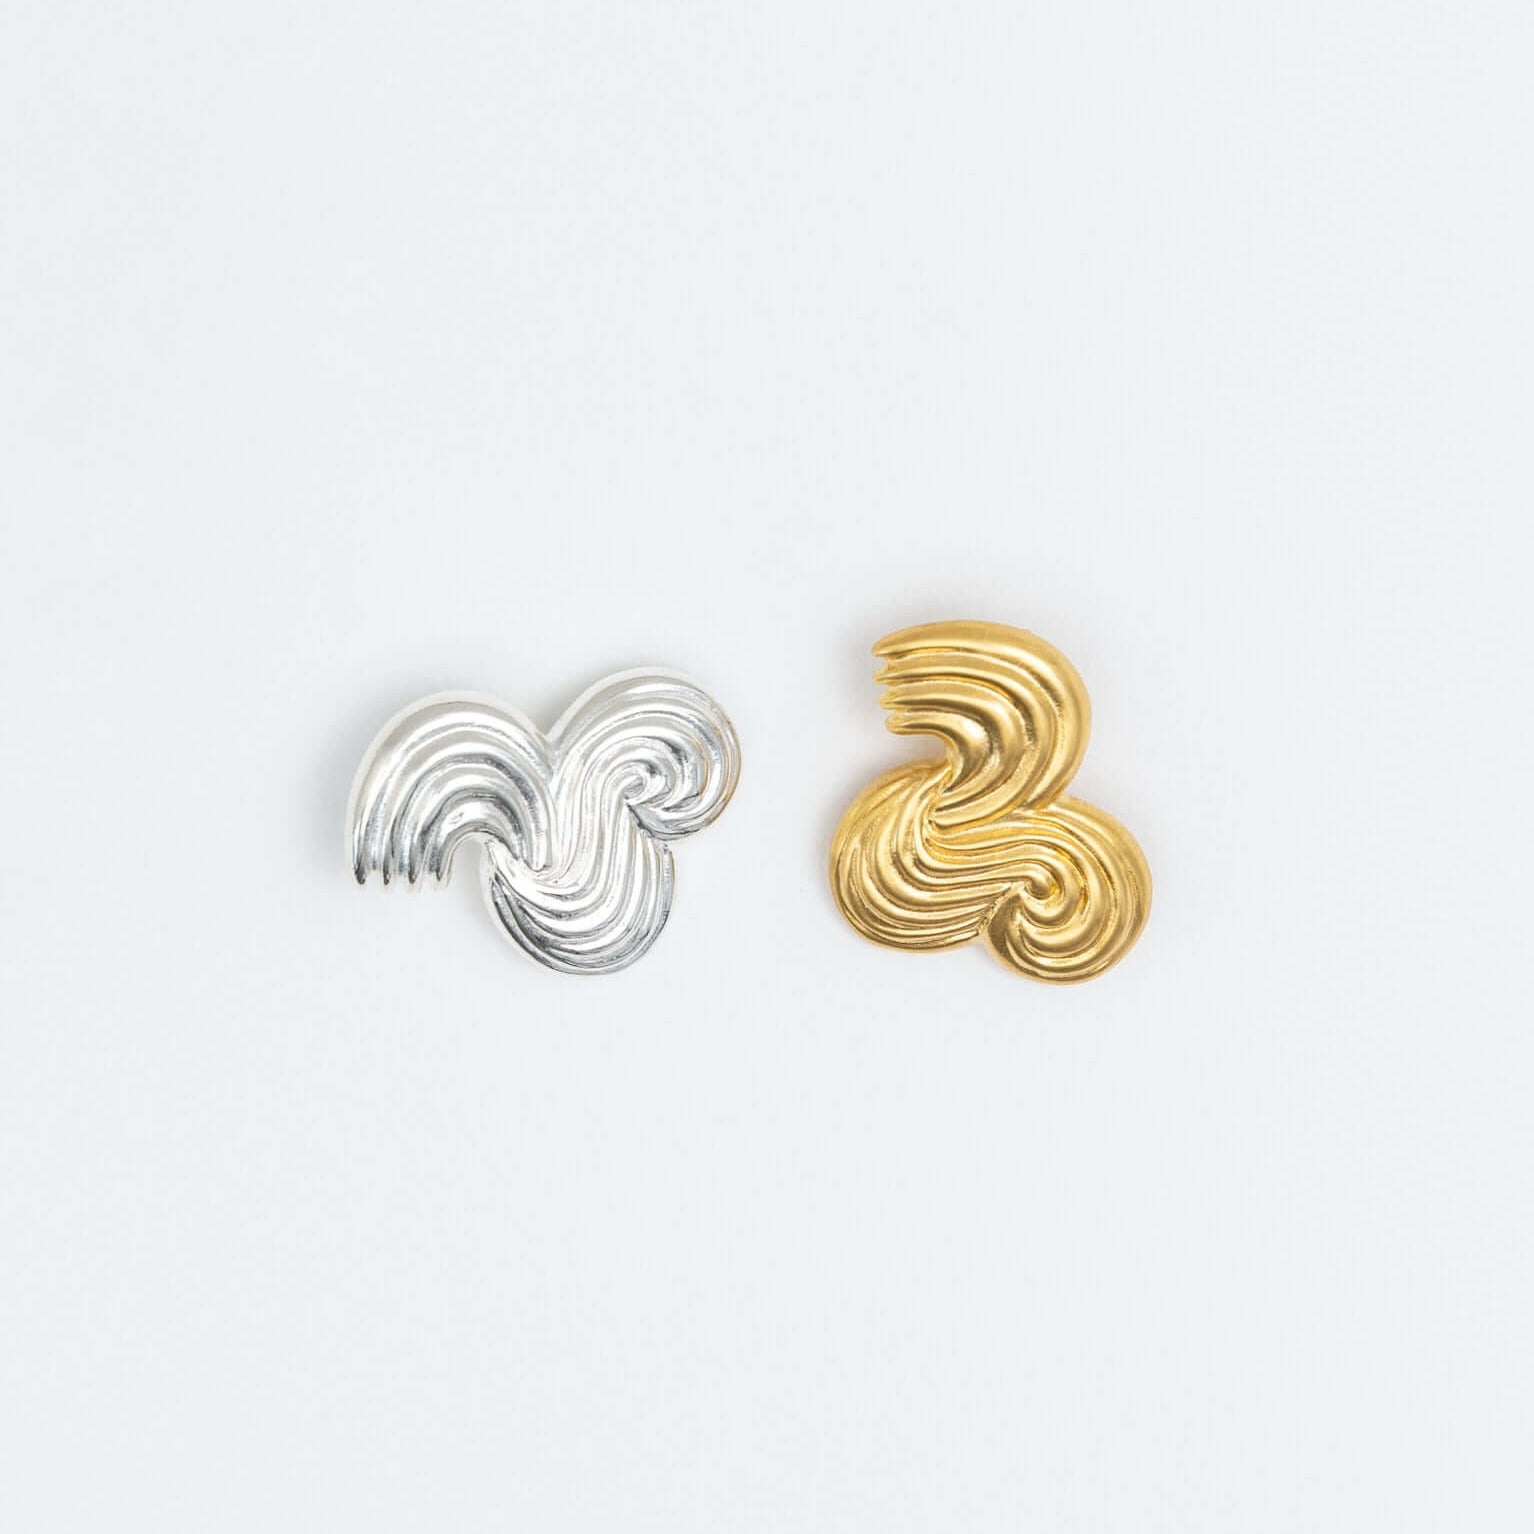 One silver and one gold earring, same design